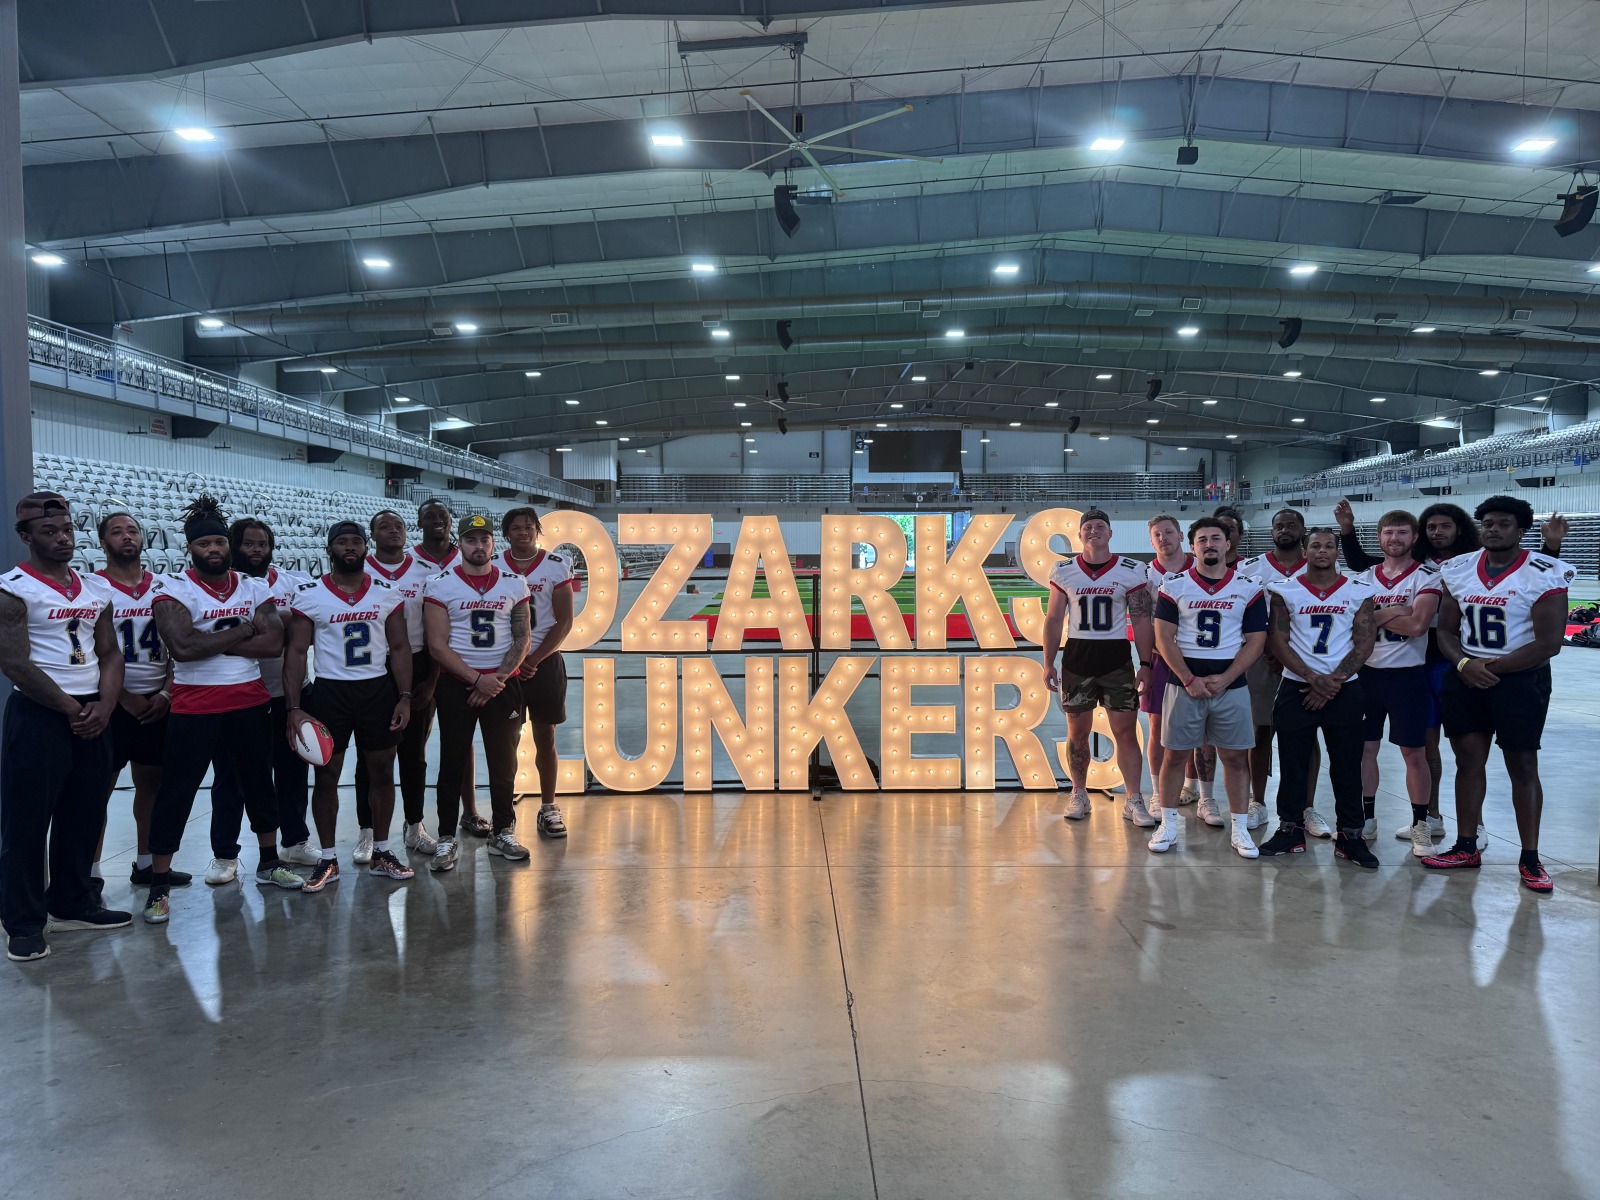 Players from the Arena League's Ozarks Lunkers pose for a photo next to giant light-up letters reading "Ozarks Lunkers."